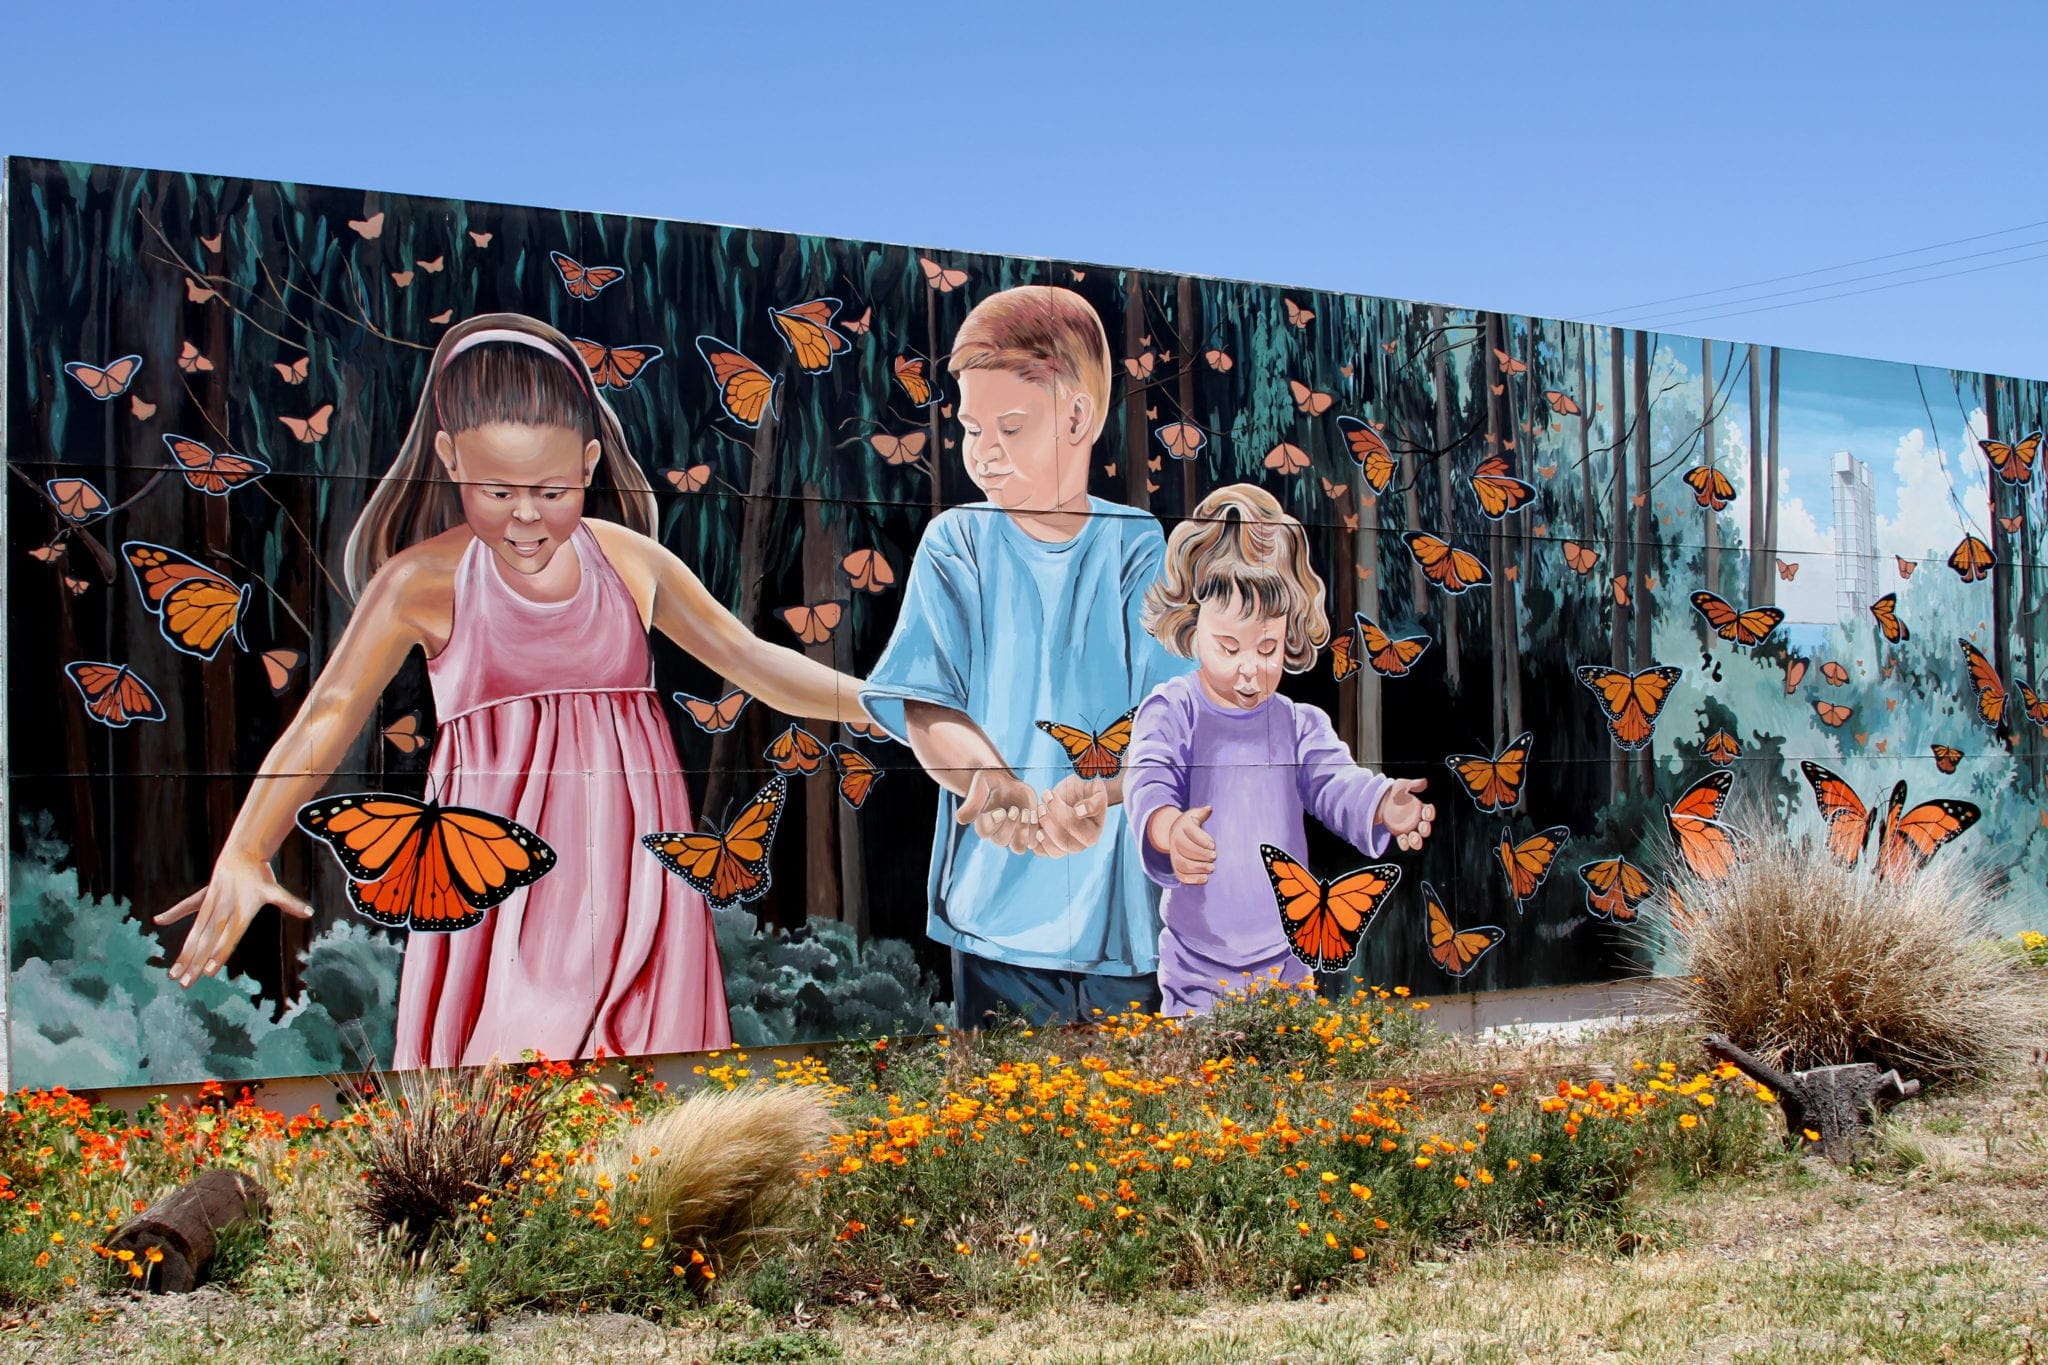 A colorful mural depicts a trio of kids surrounded by orange and black monarch butterflies